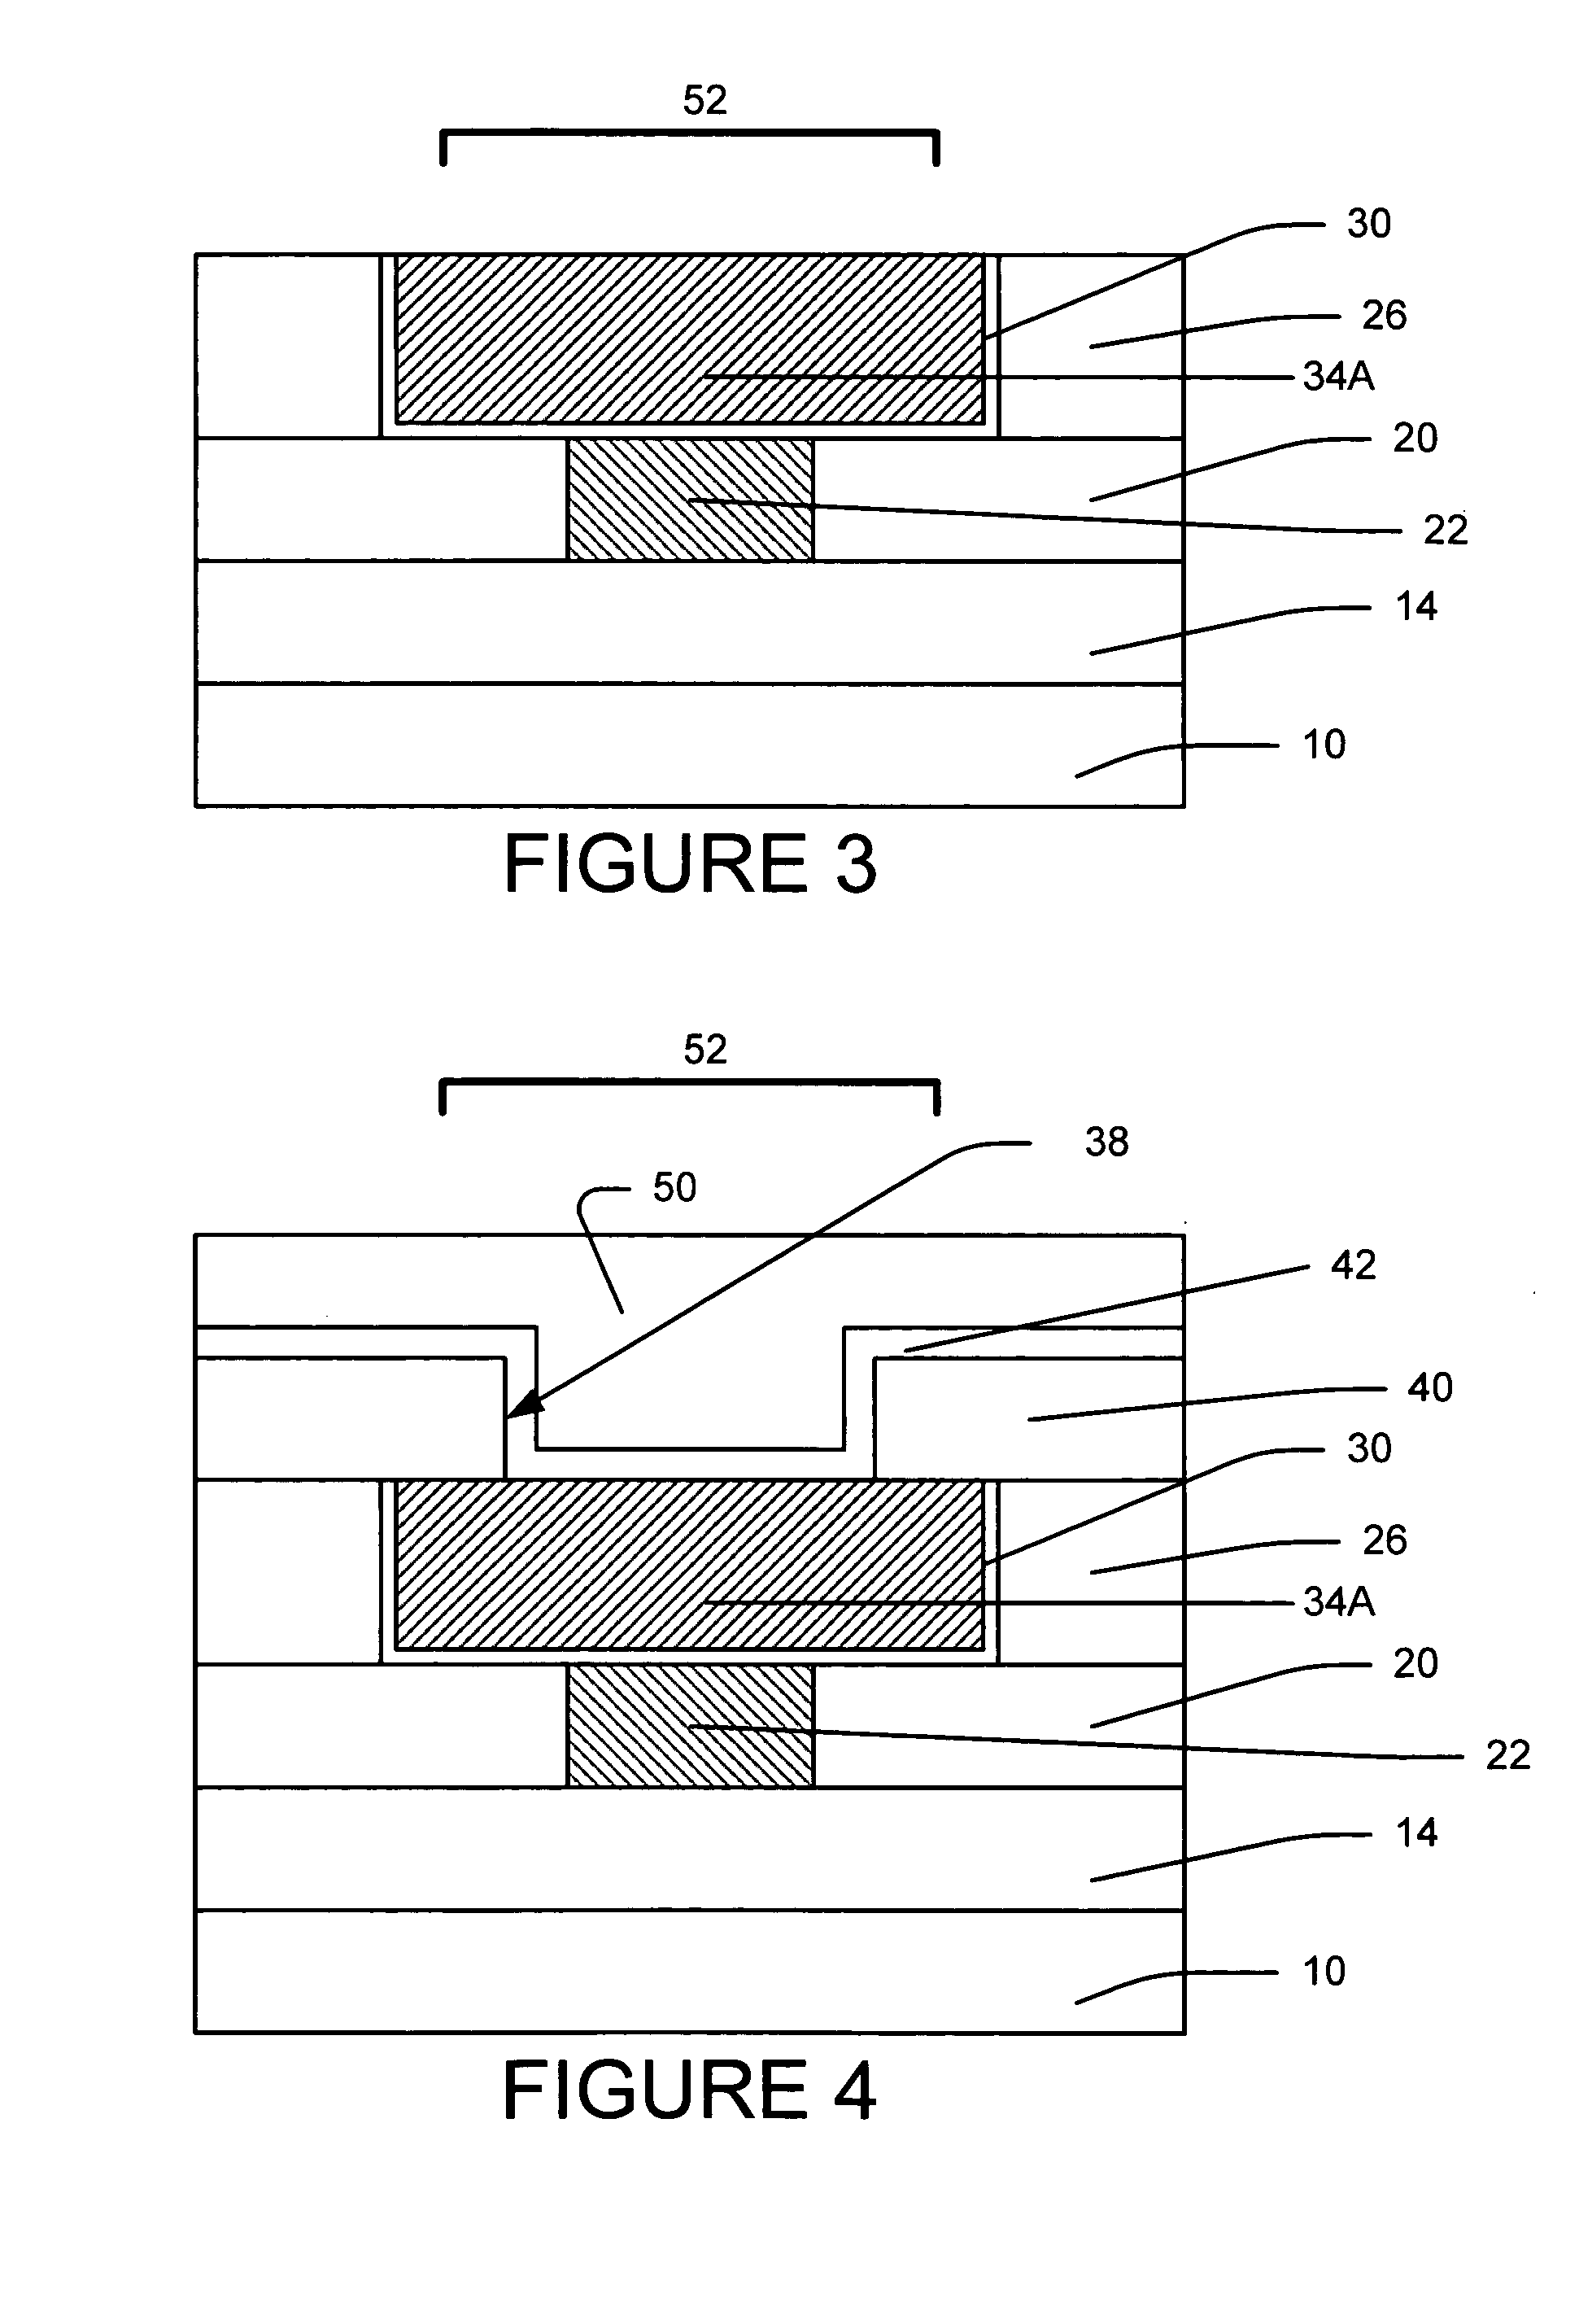 Structure and method for fabricating a bond pad structure